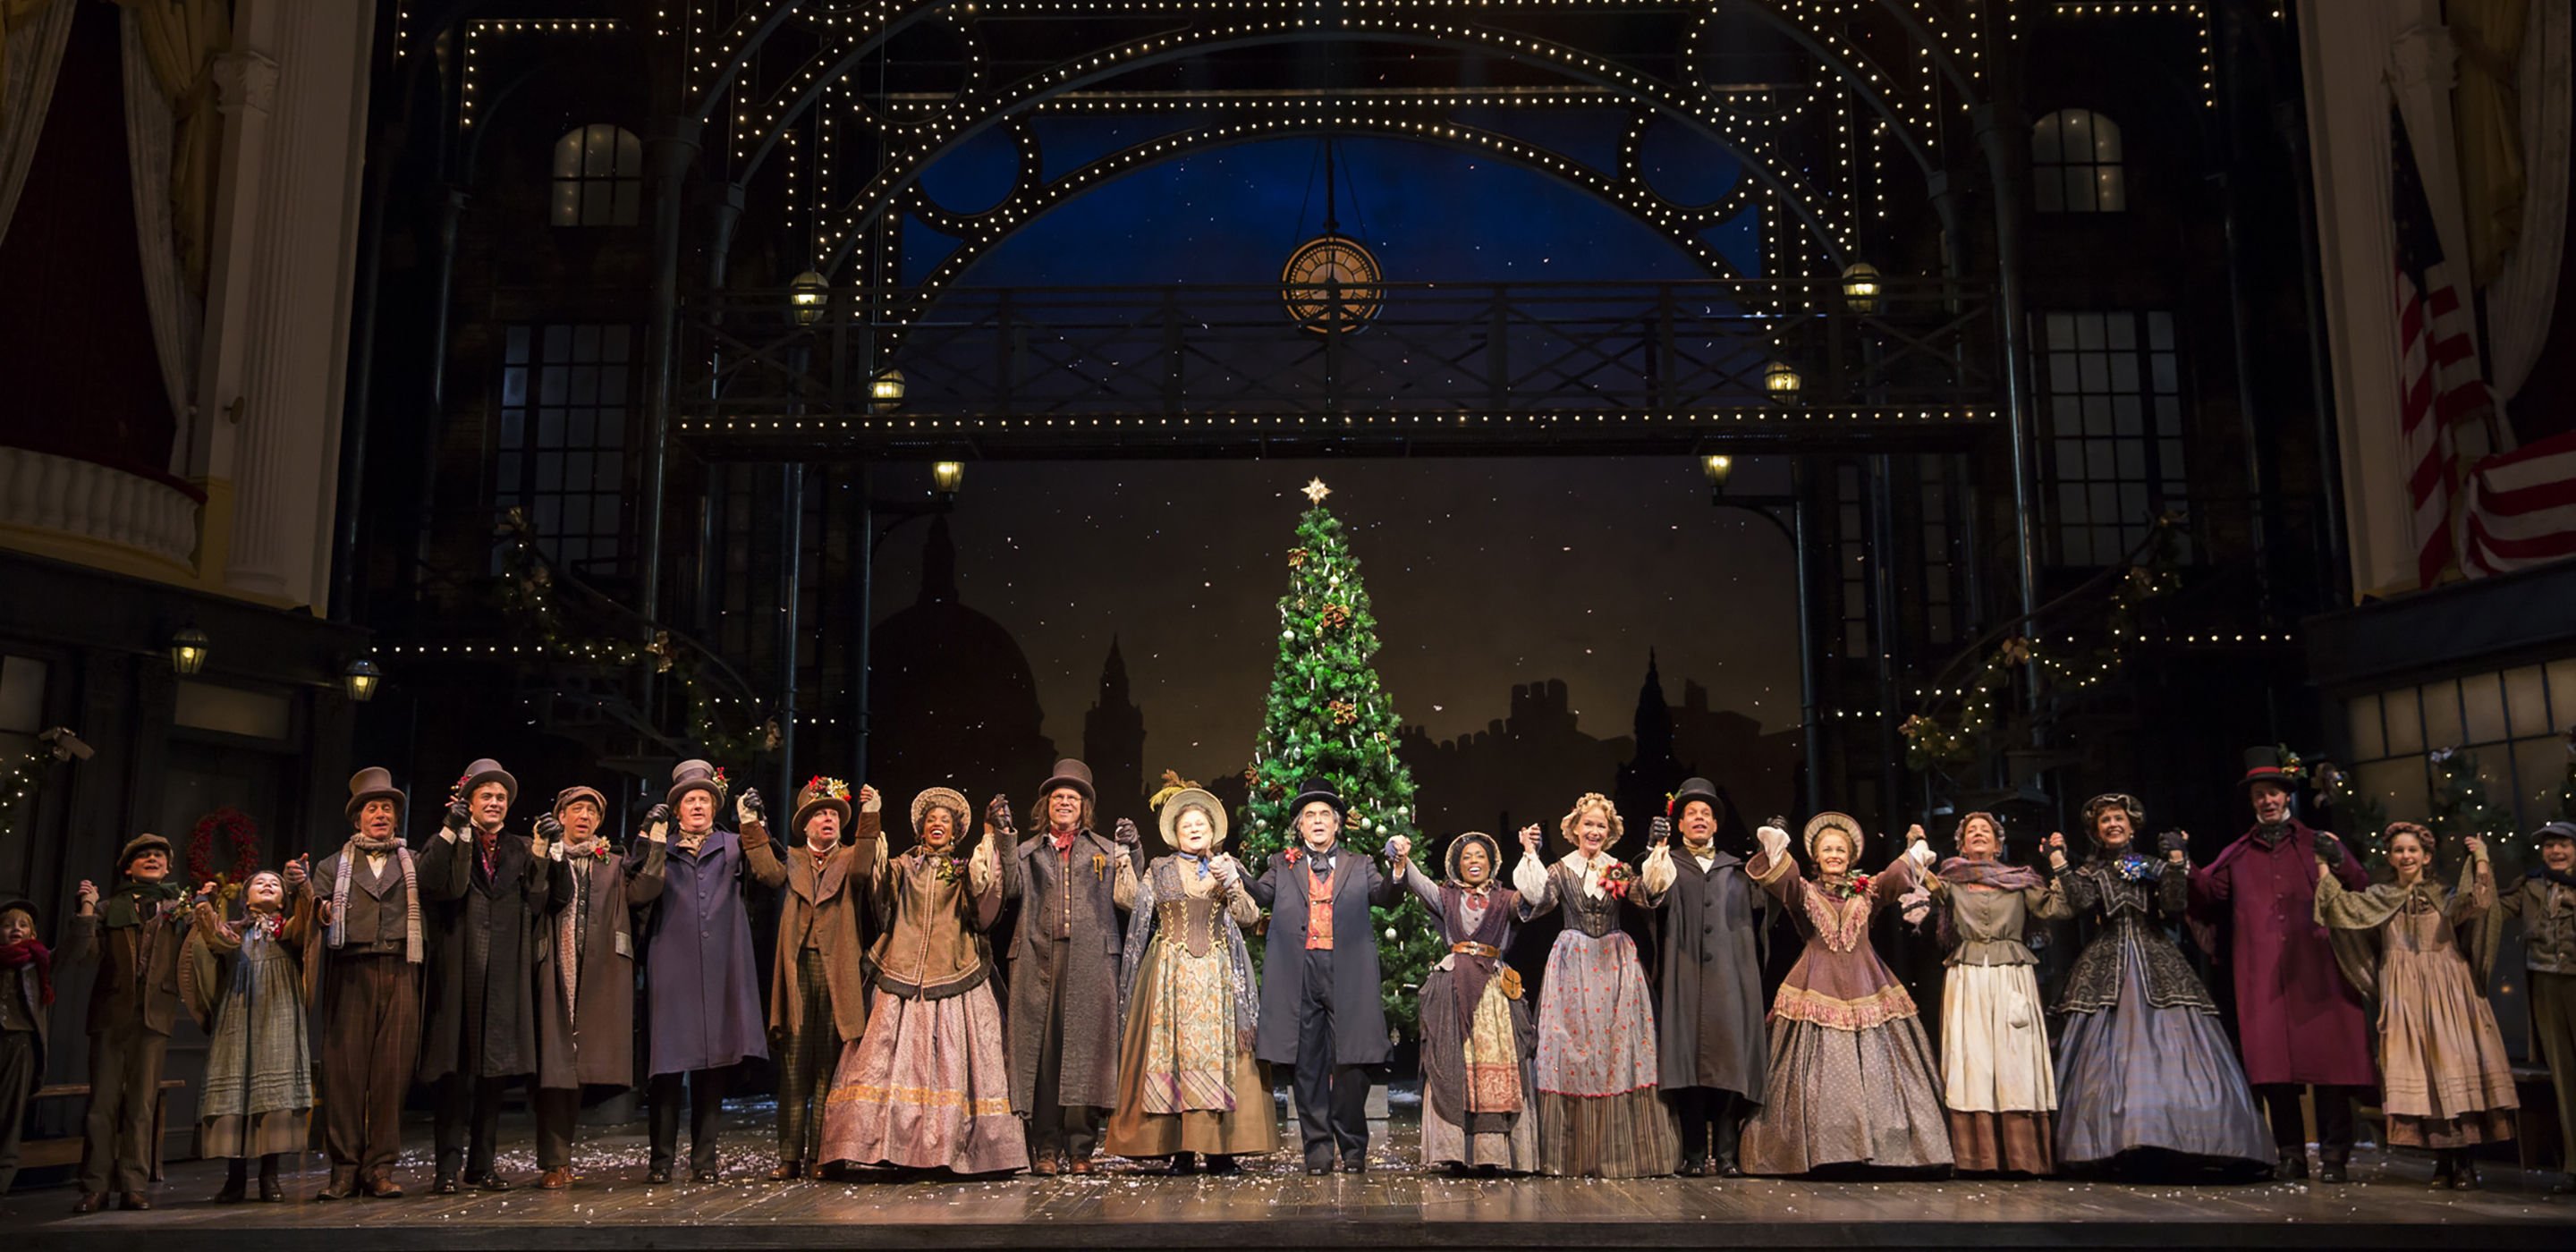 A large group of men and women in Victorian era clothing stand in a line hand-in-hand on a stage and face the audience. Behind them is a Christmas tree.